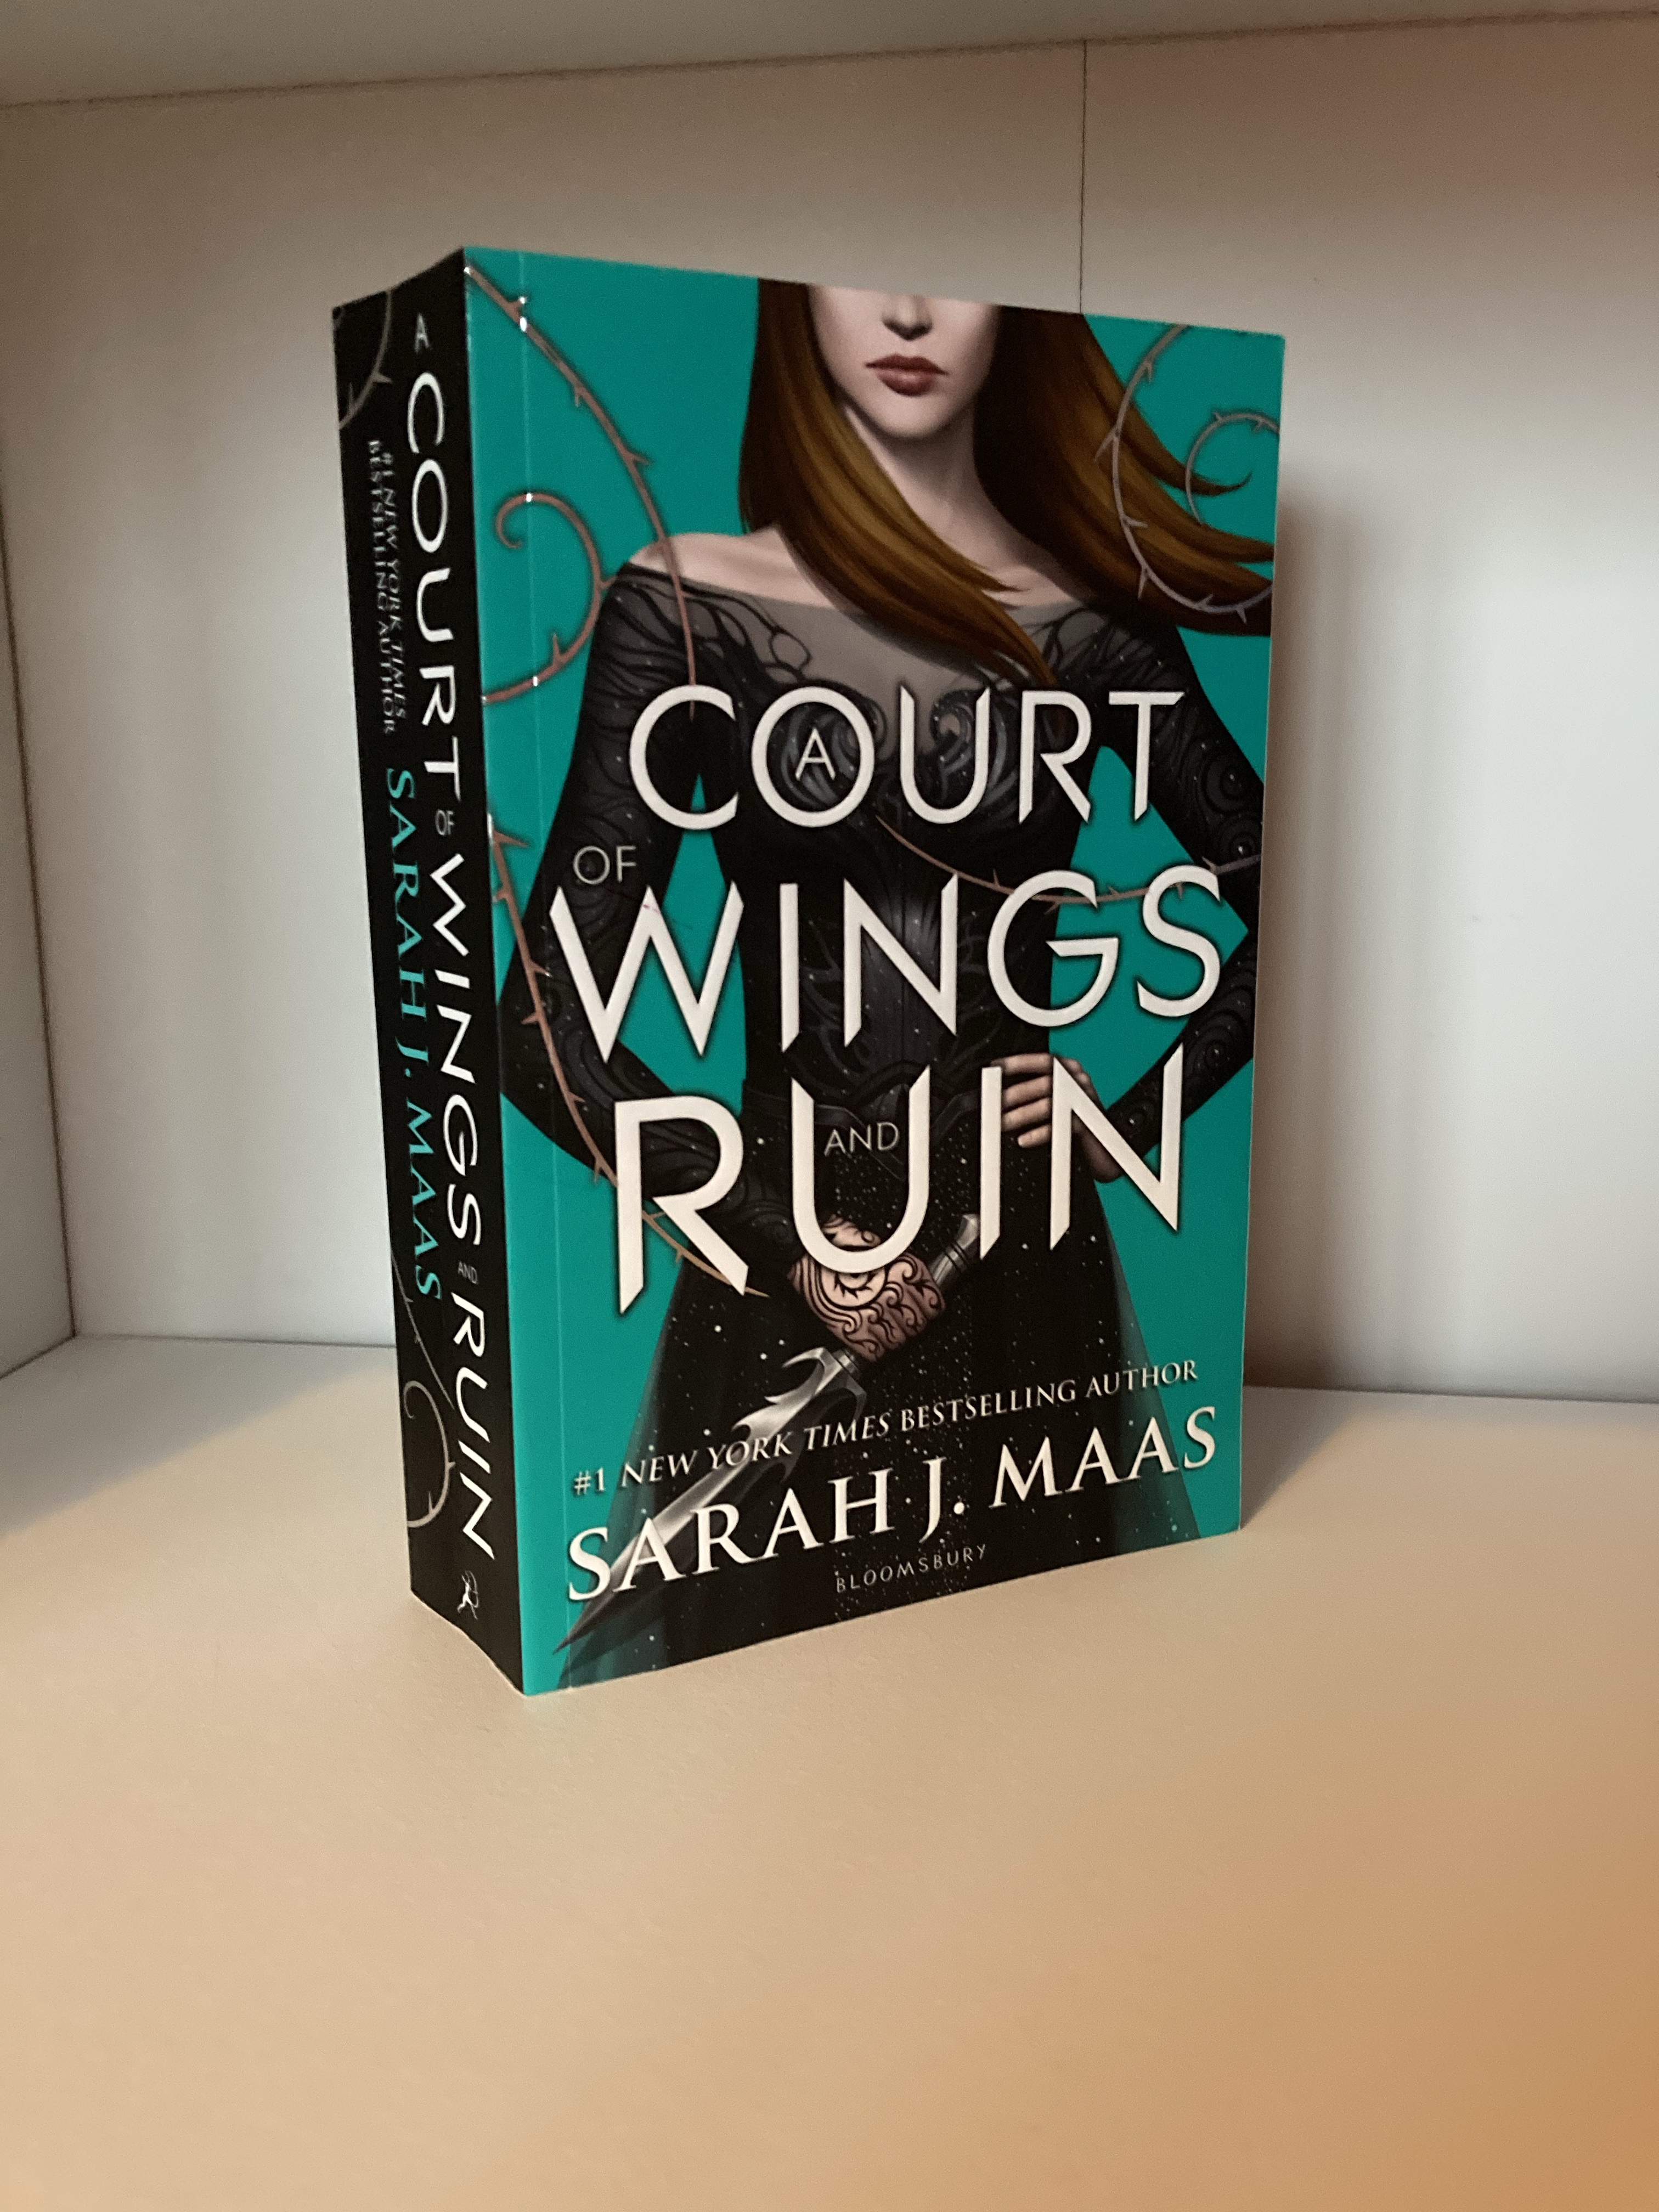 The cover of A Court of Wings and Ruin by Sarah J. Maas